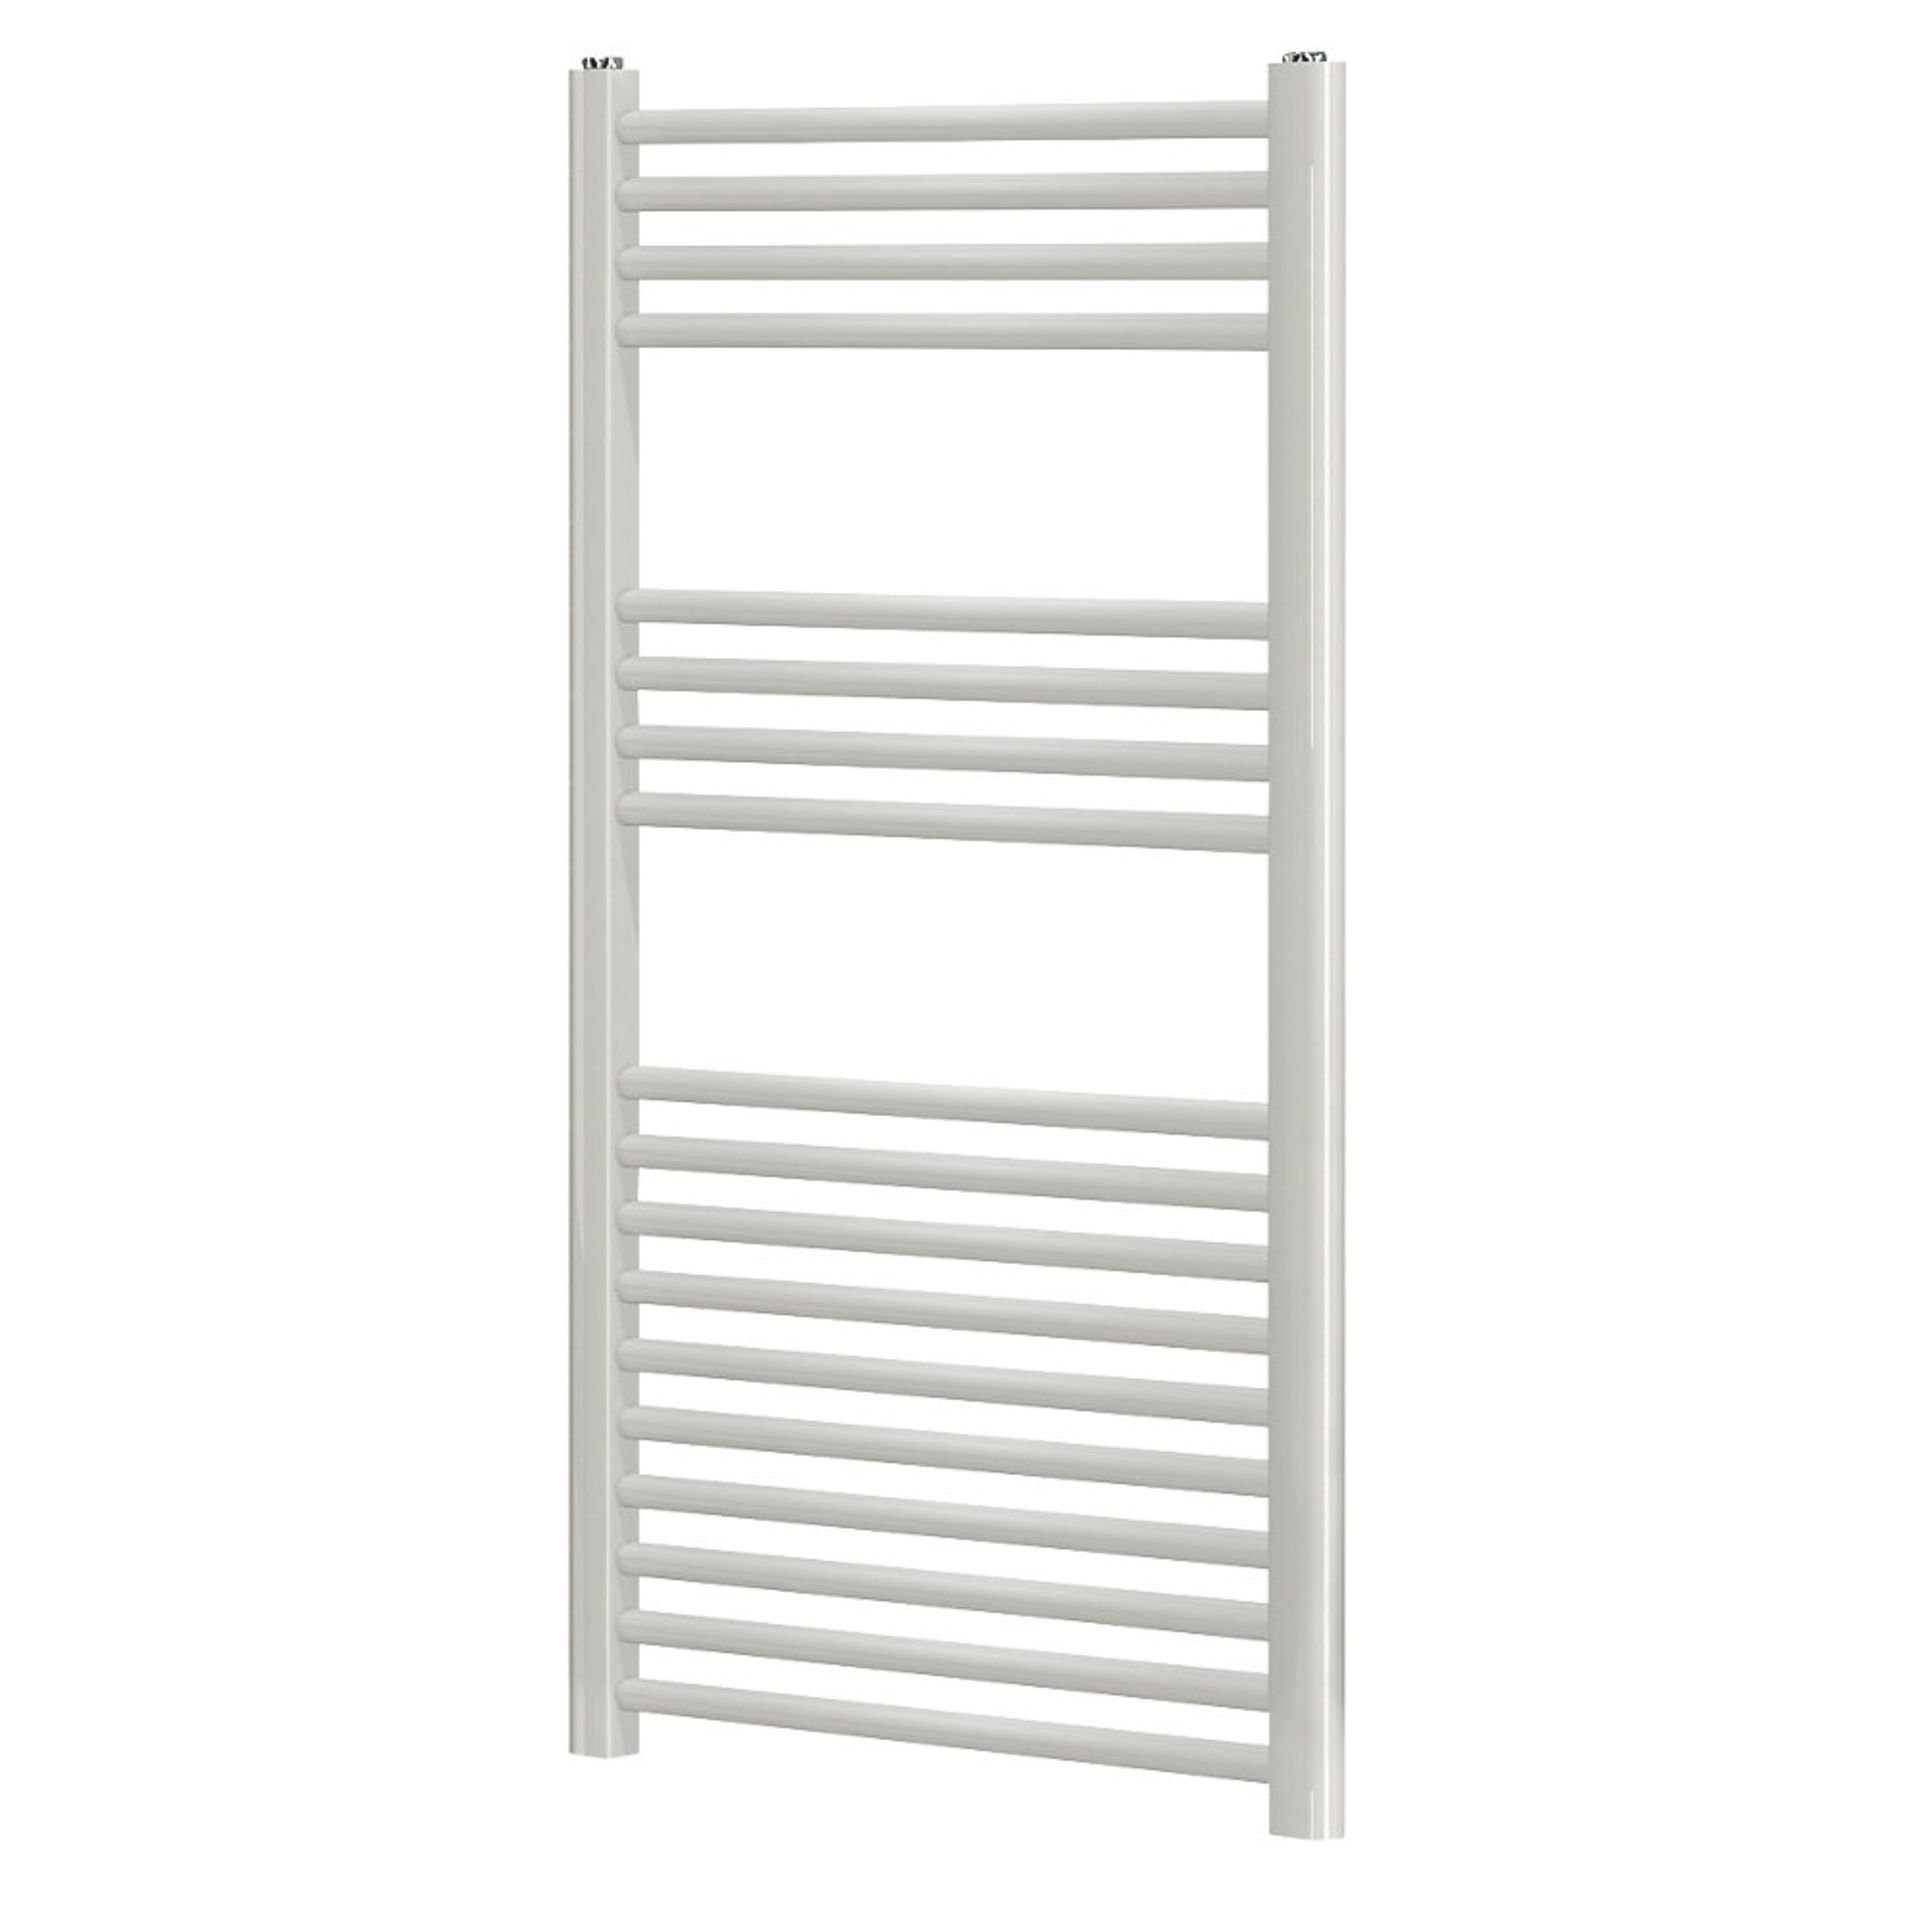 (MC181) 1000 X 450MM TOWEL RADIATOR WHITE. High quality steel construction with powder-coated - Image 2 of 2